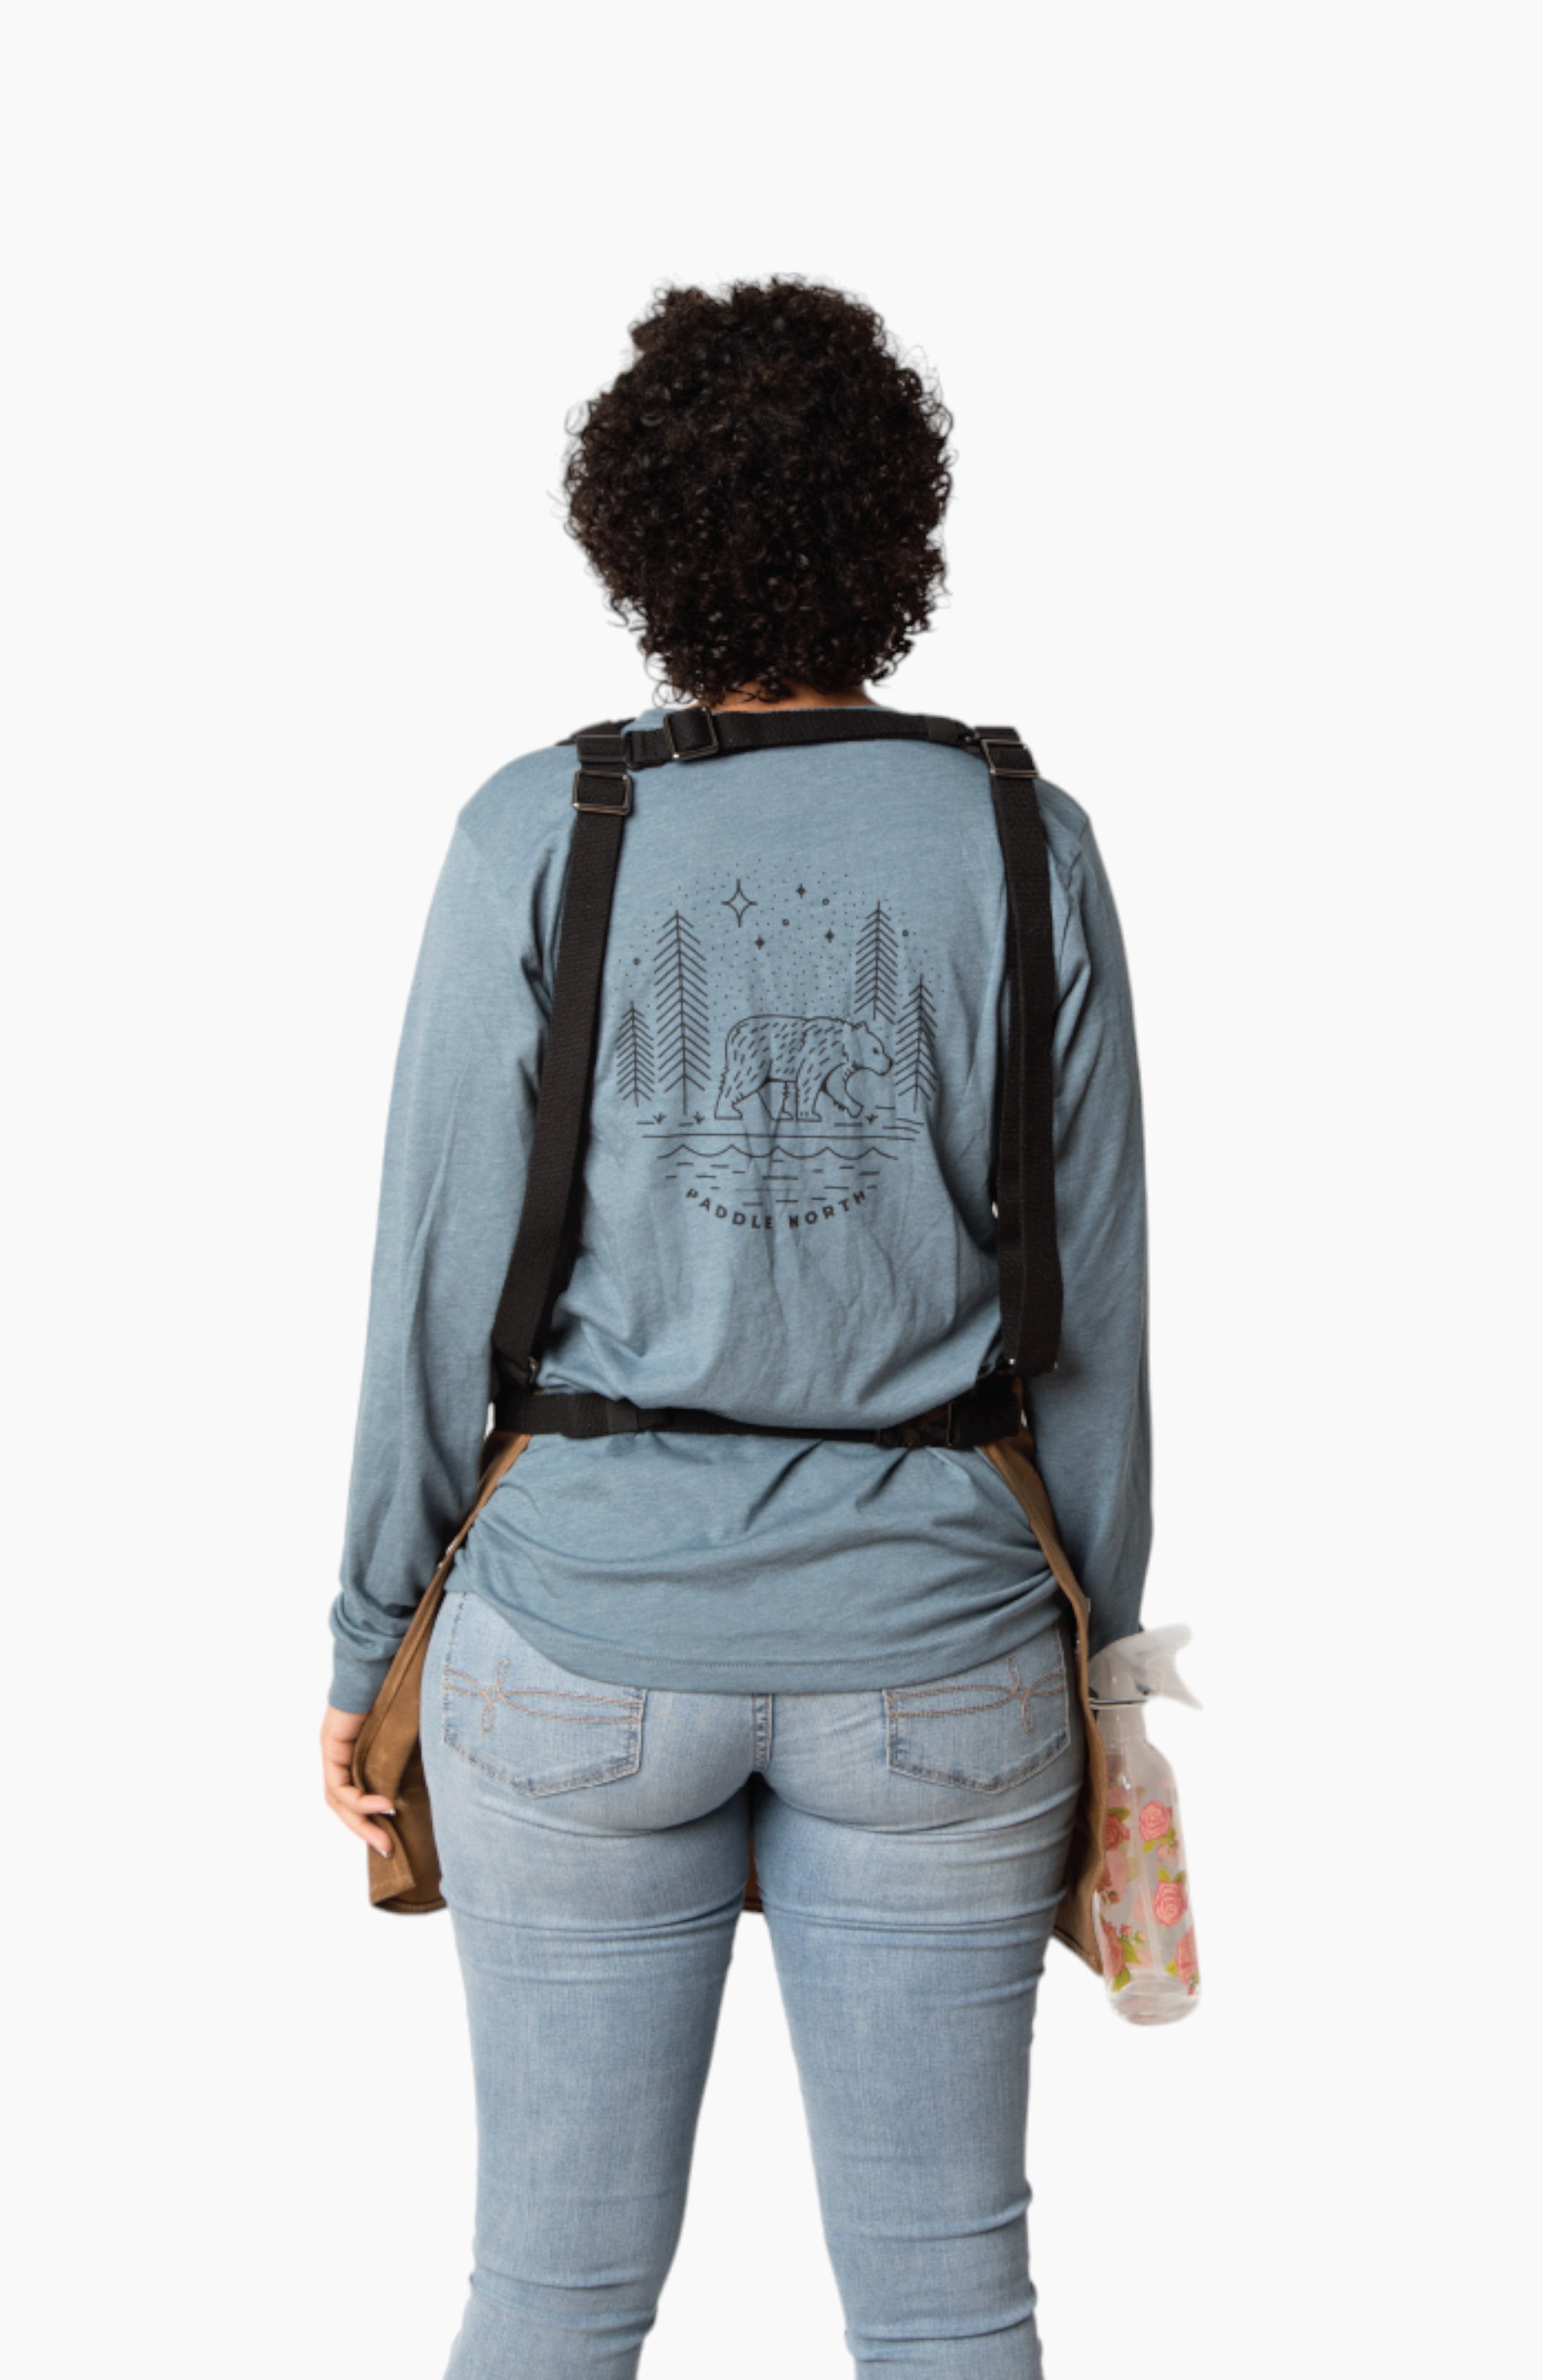 Photo of the back of a person wearing an apron.